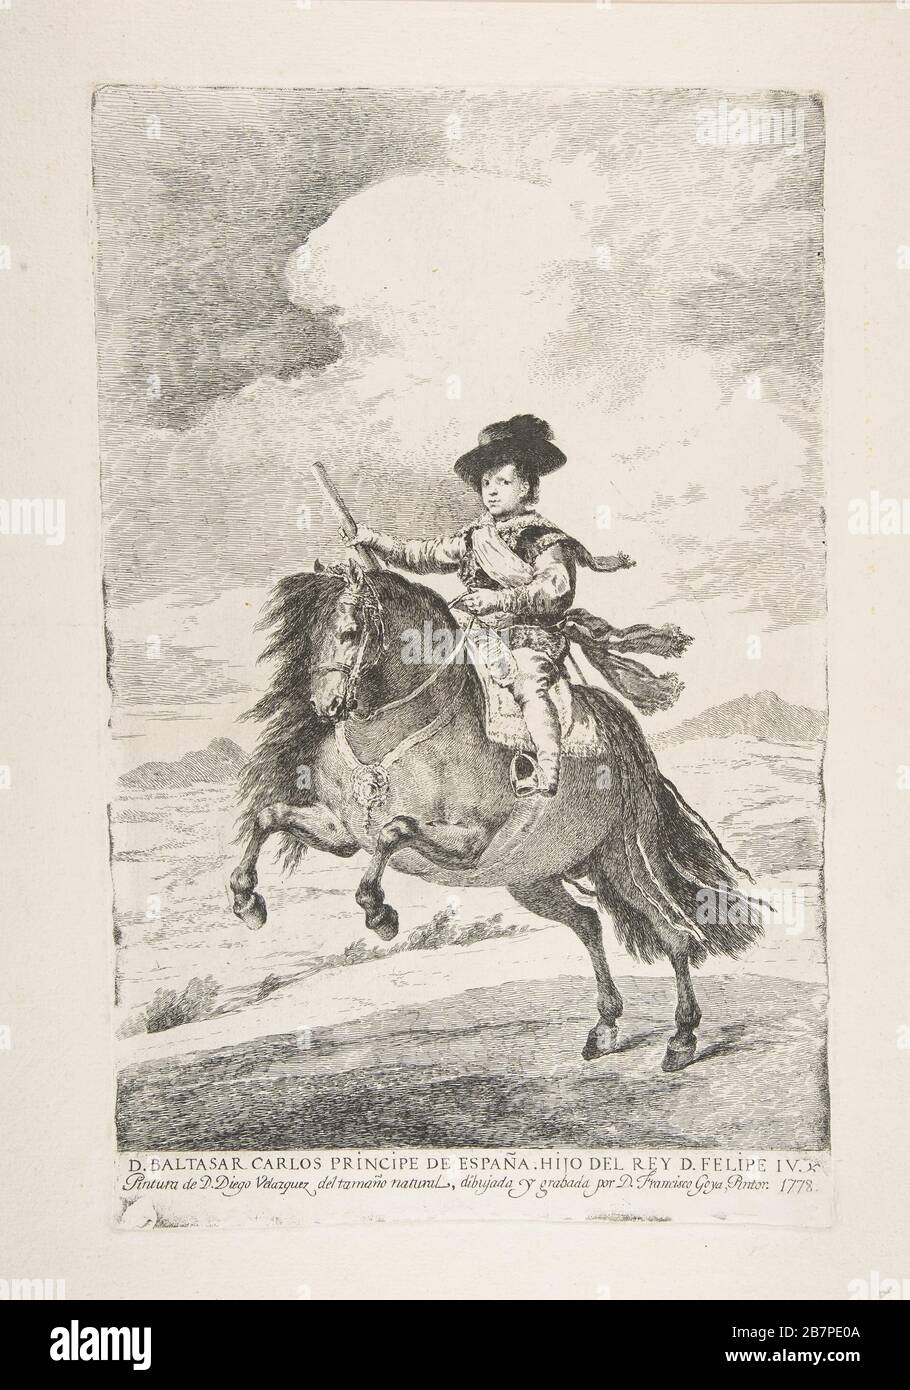 Balthasar Carlos, Prince of Spain and Son of Philip IV (D. Baltasar Carlos Principe de Espa&#xf1;a. Hijo del Rey D. Felipe IV), from Etchings after Velazquez, 1778. Stock Photo